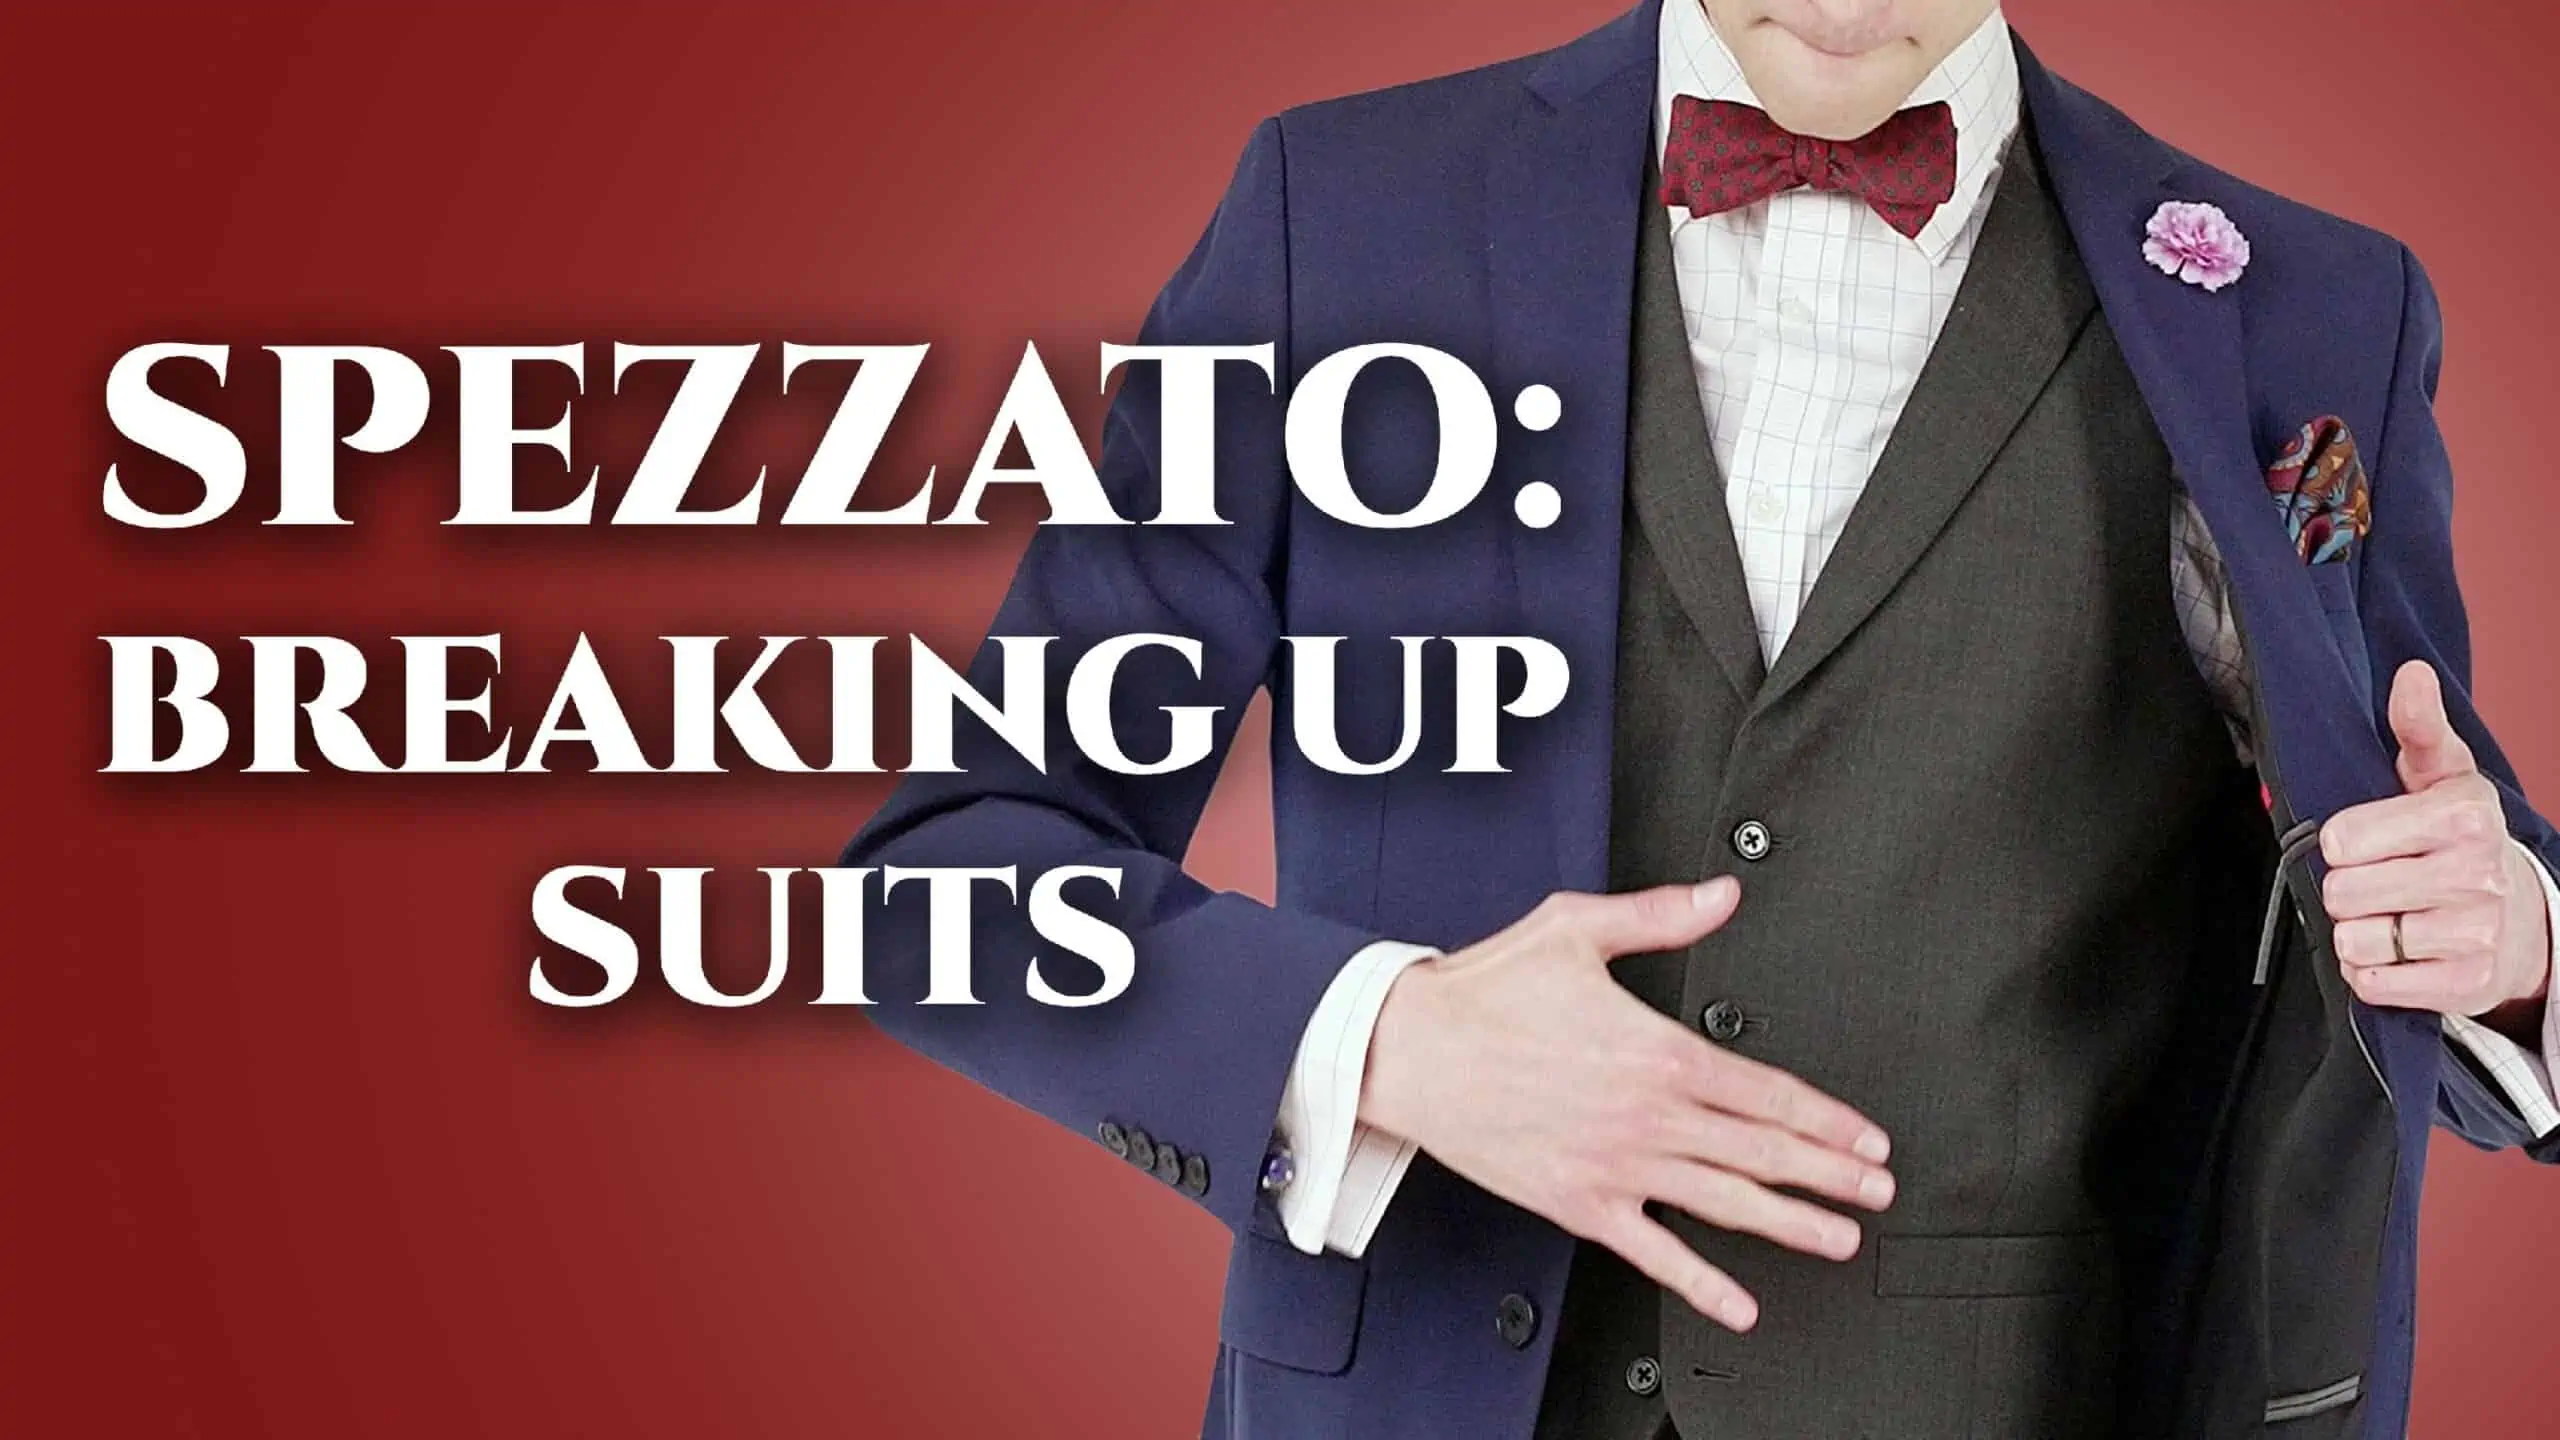 Spezzato: Breaking Up Suits for Casual Menswear Looks